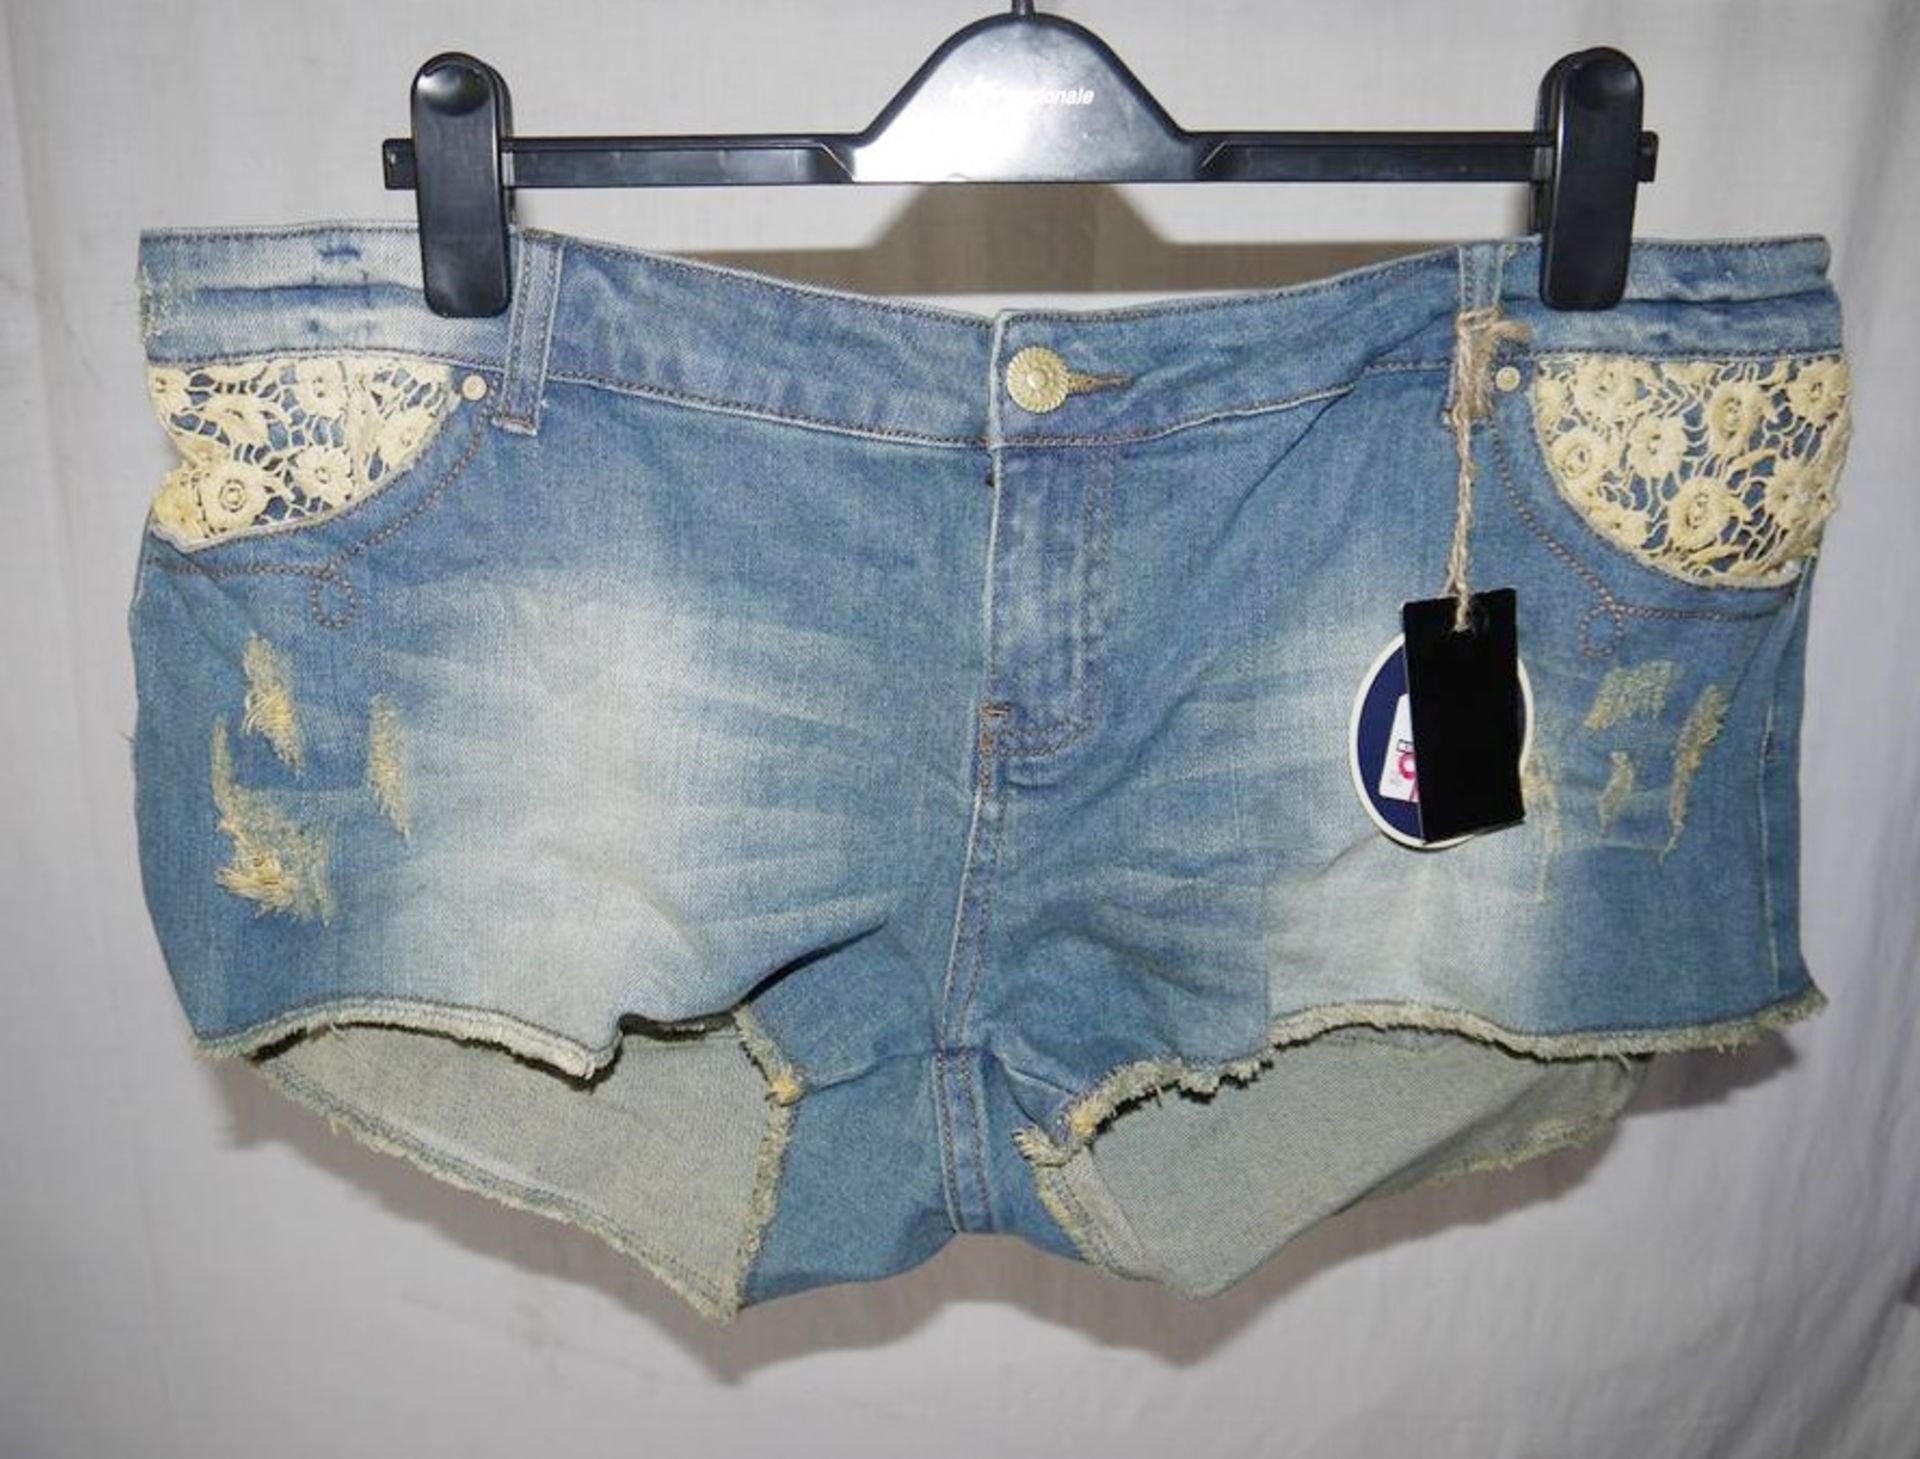 82 x Items Of Assorted Women's Clothing - Box407 - Shorts, Skirts, Pants, Tops & Swimwear - Sizes - Image 5 of 21